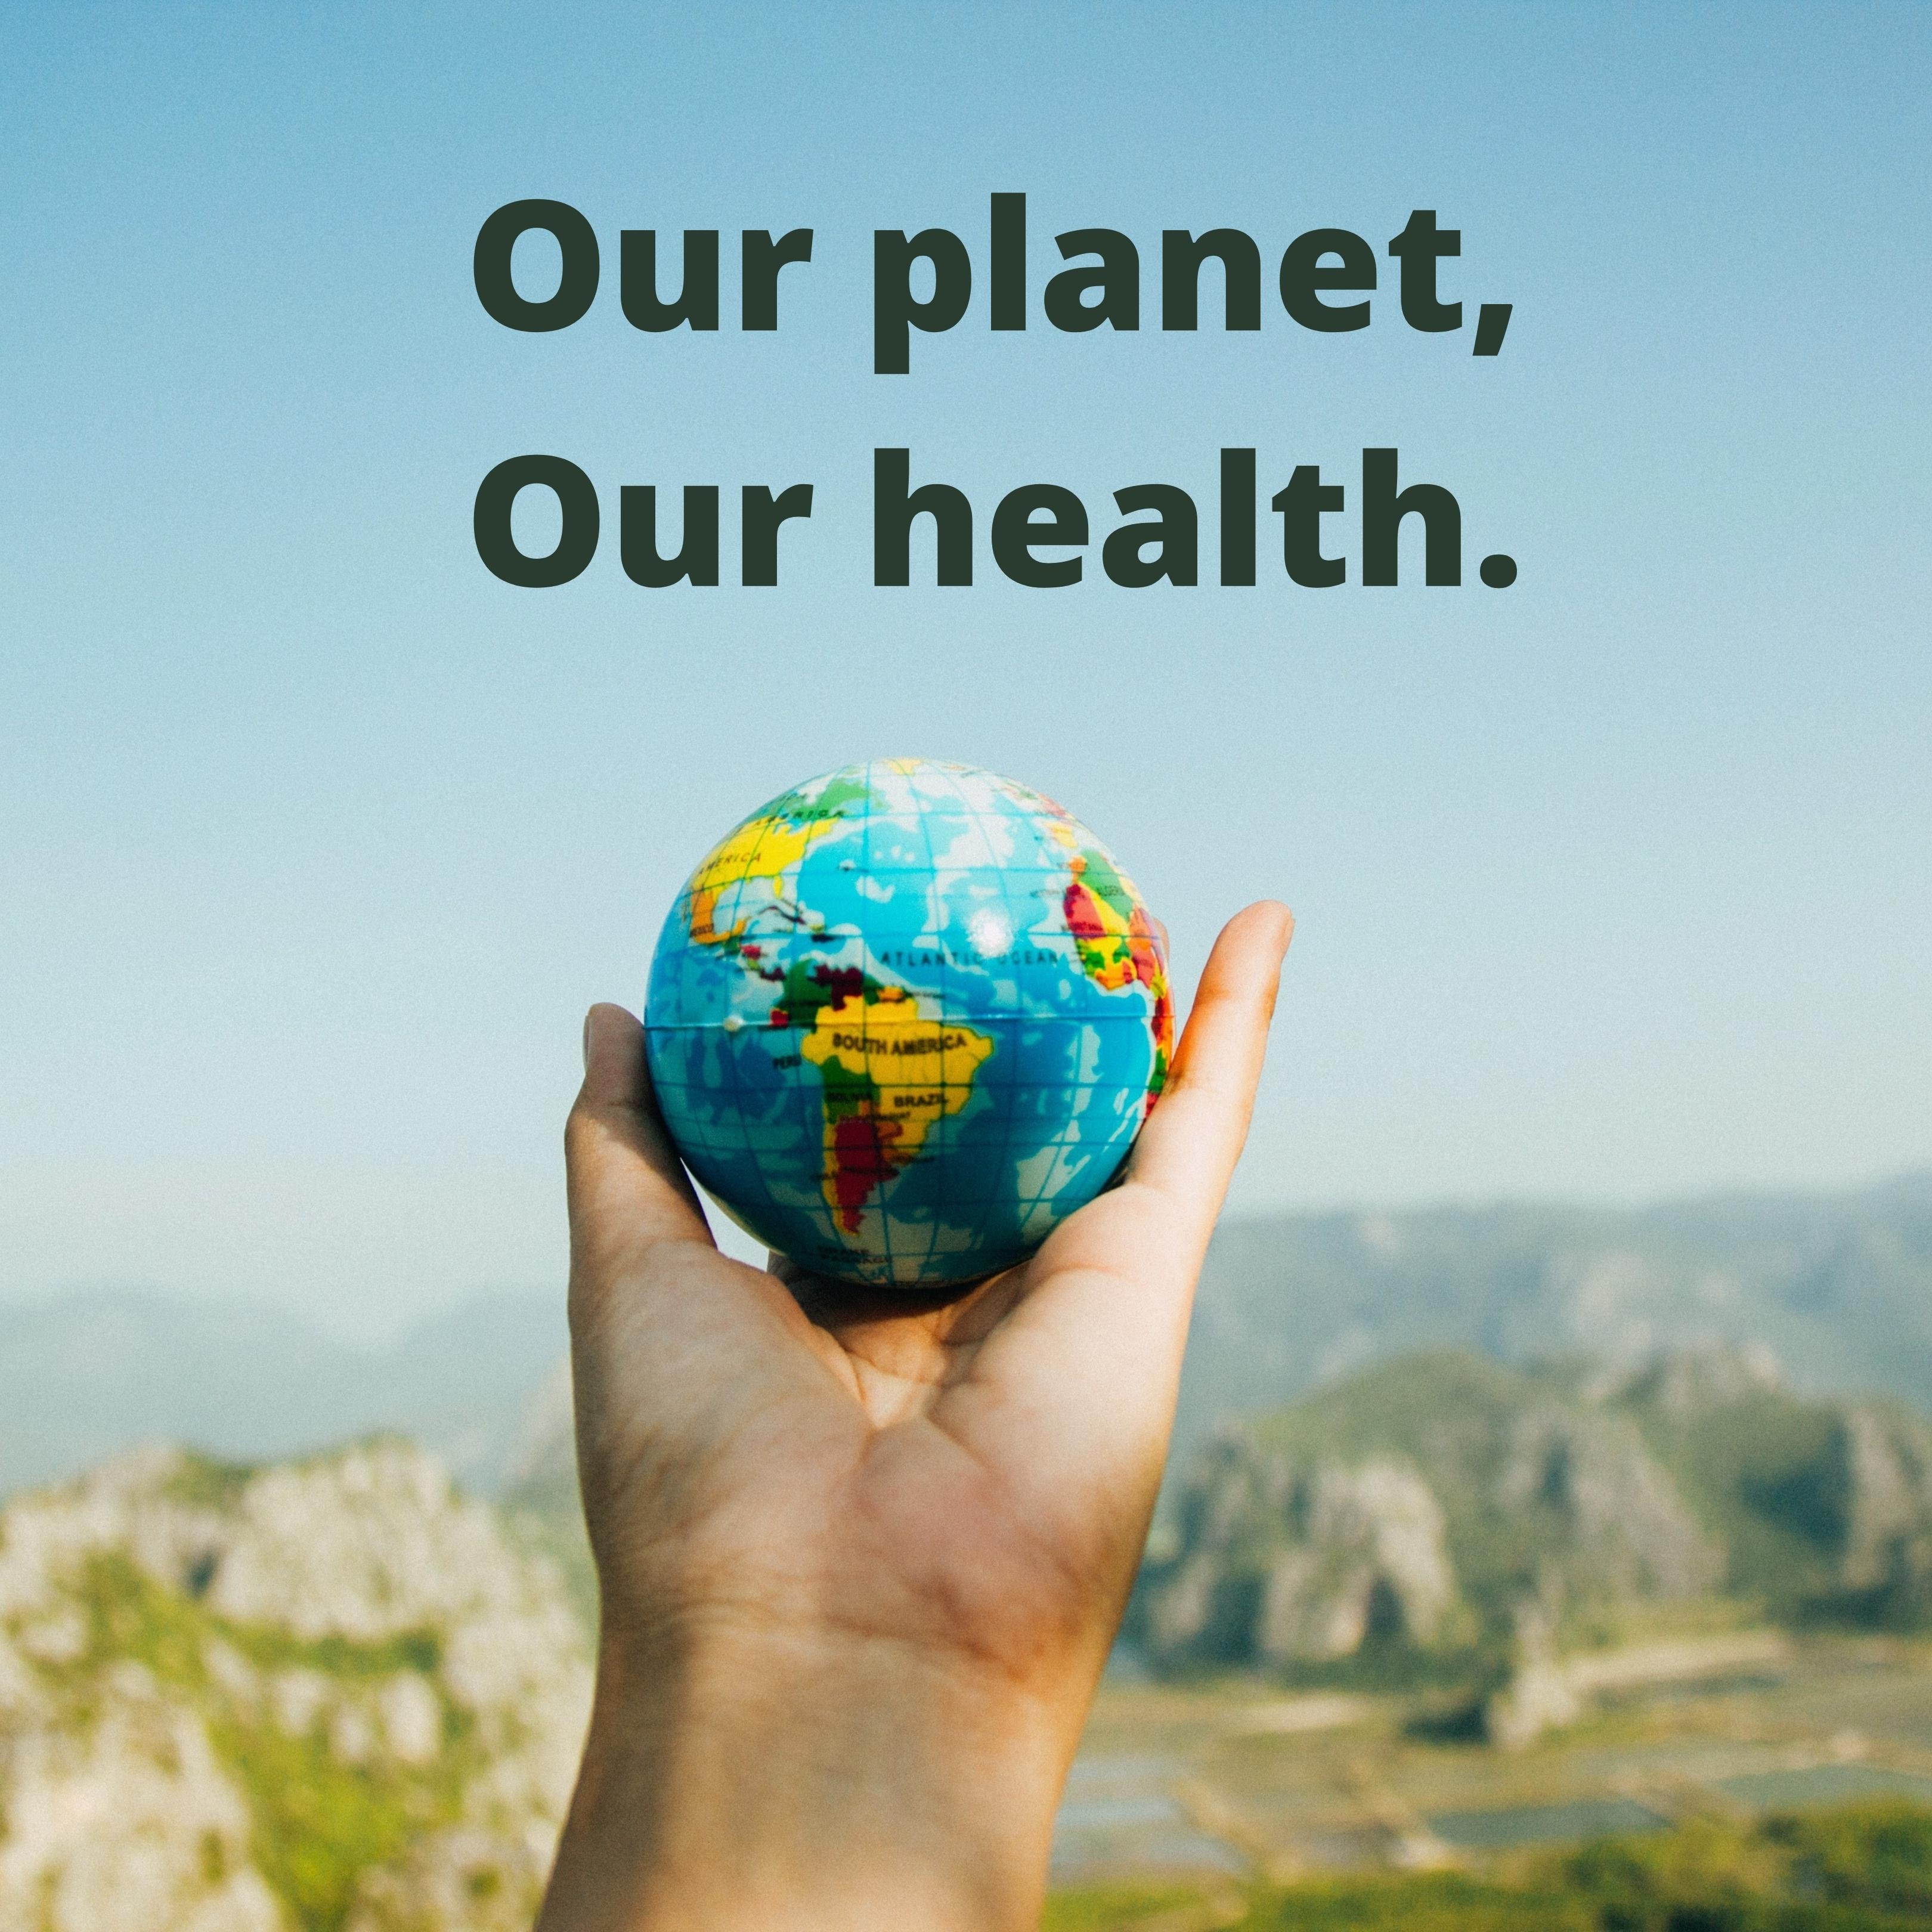 Our planet, our health, a hand holding the Earth